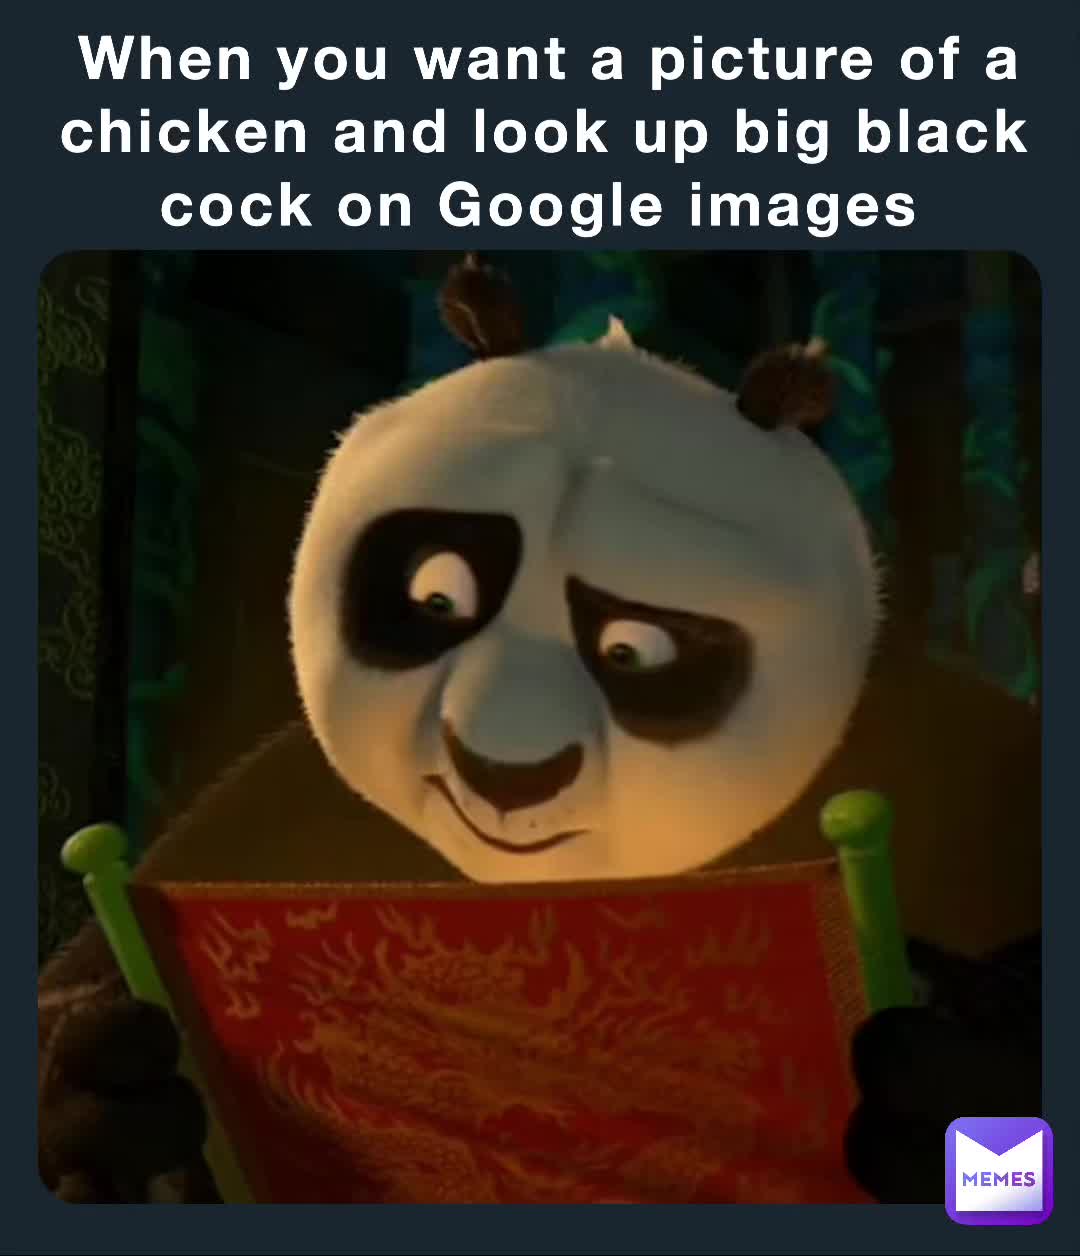 When You Want A Picture Of A Chicken And Look Up Big Black Cock On